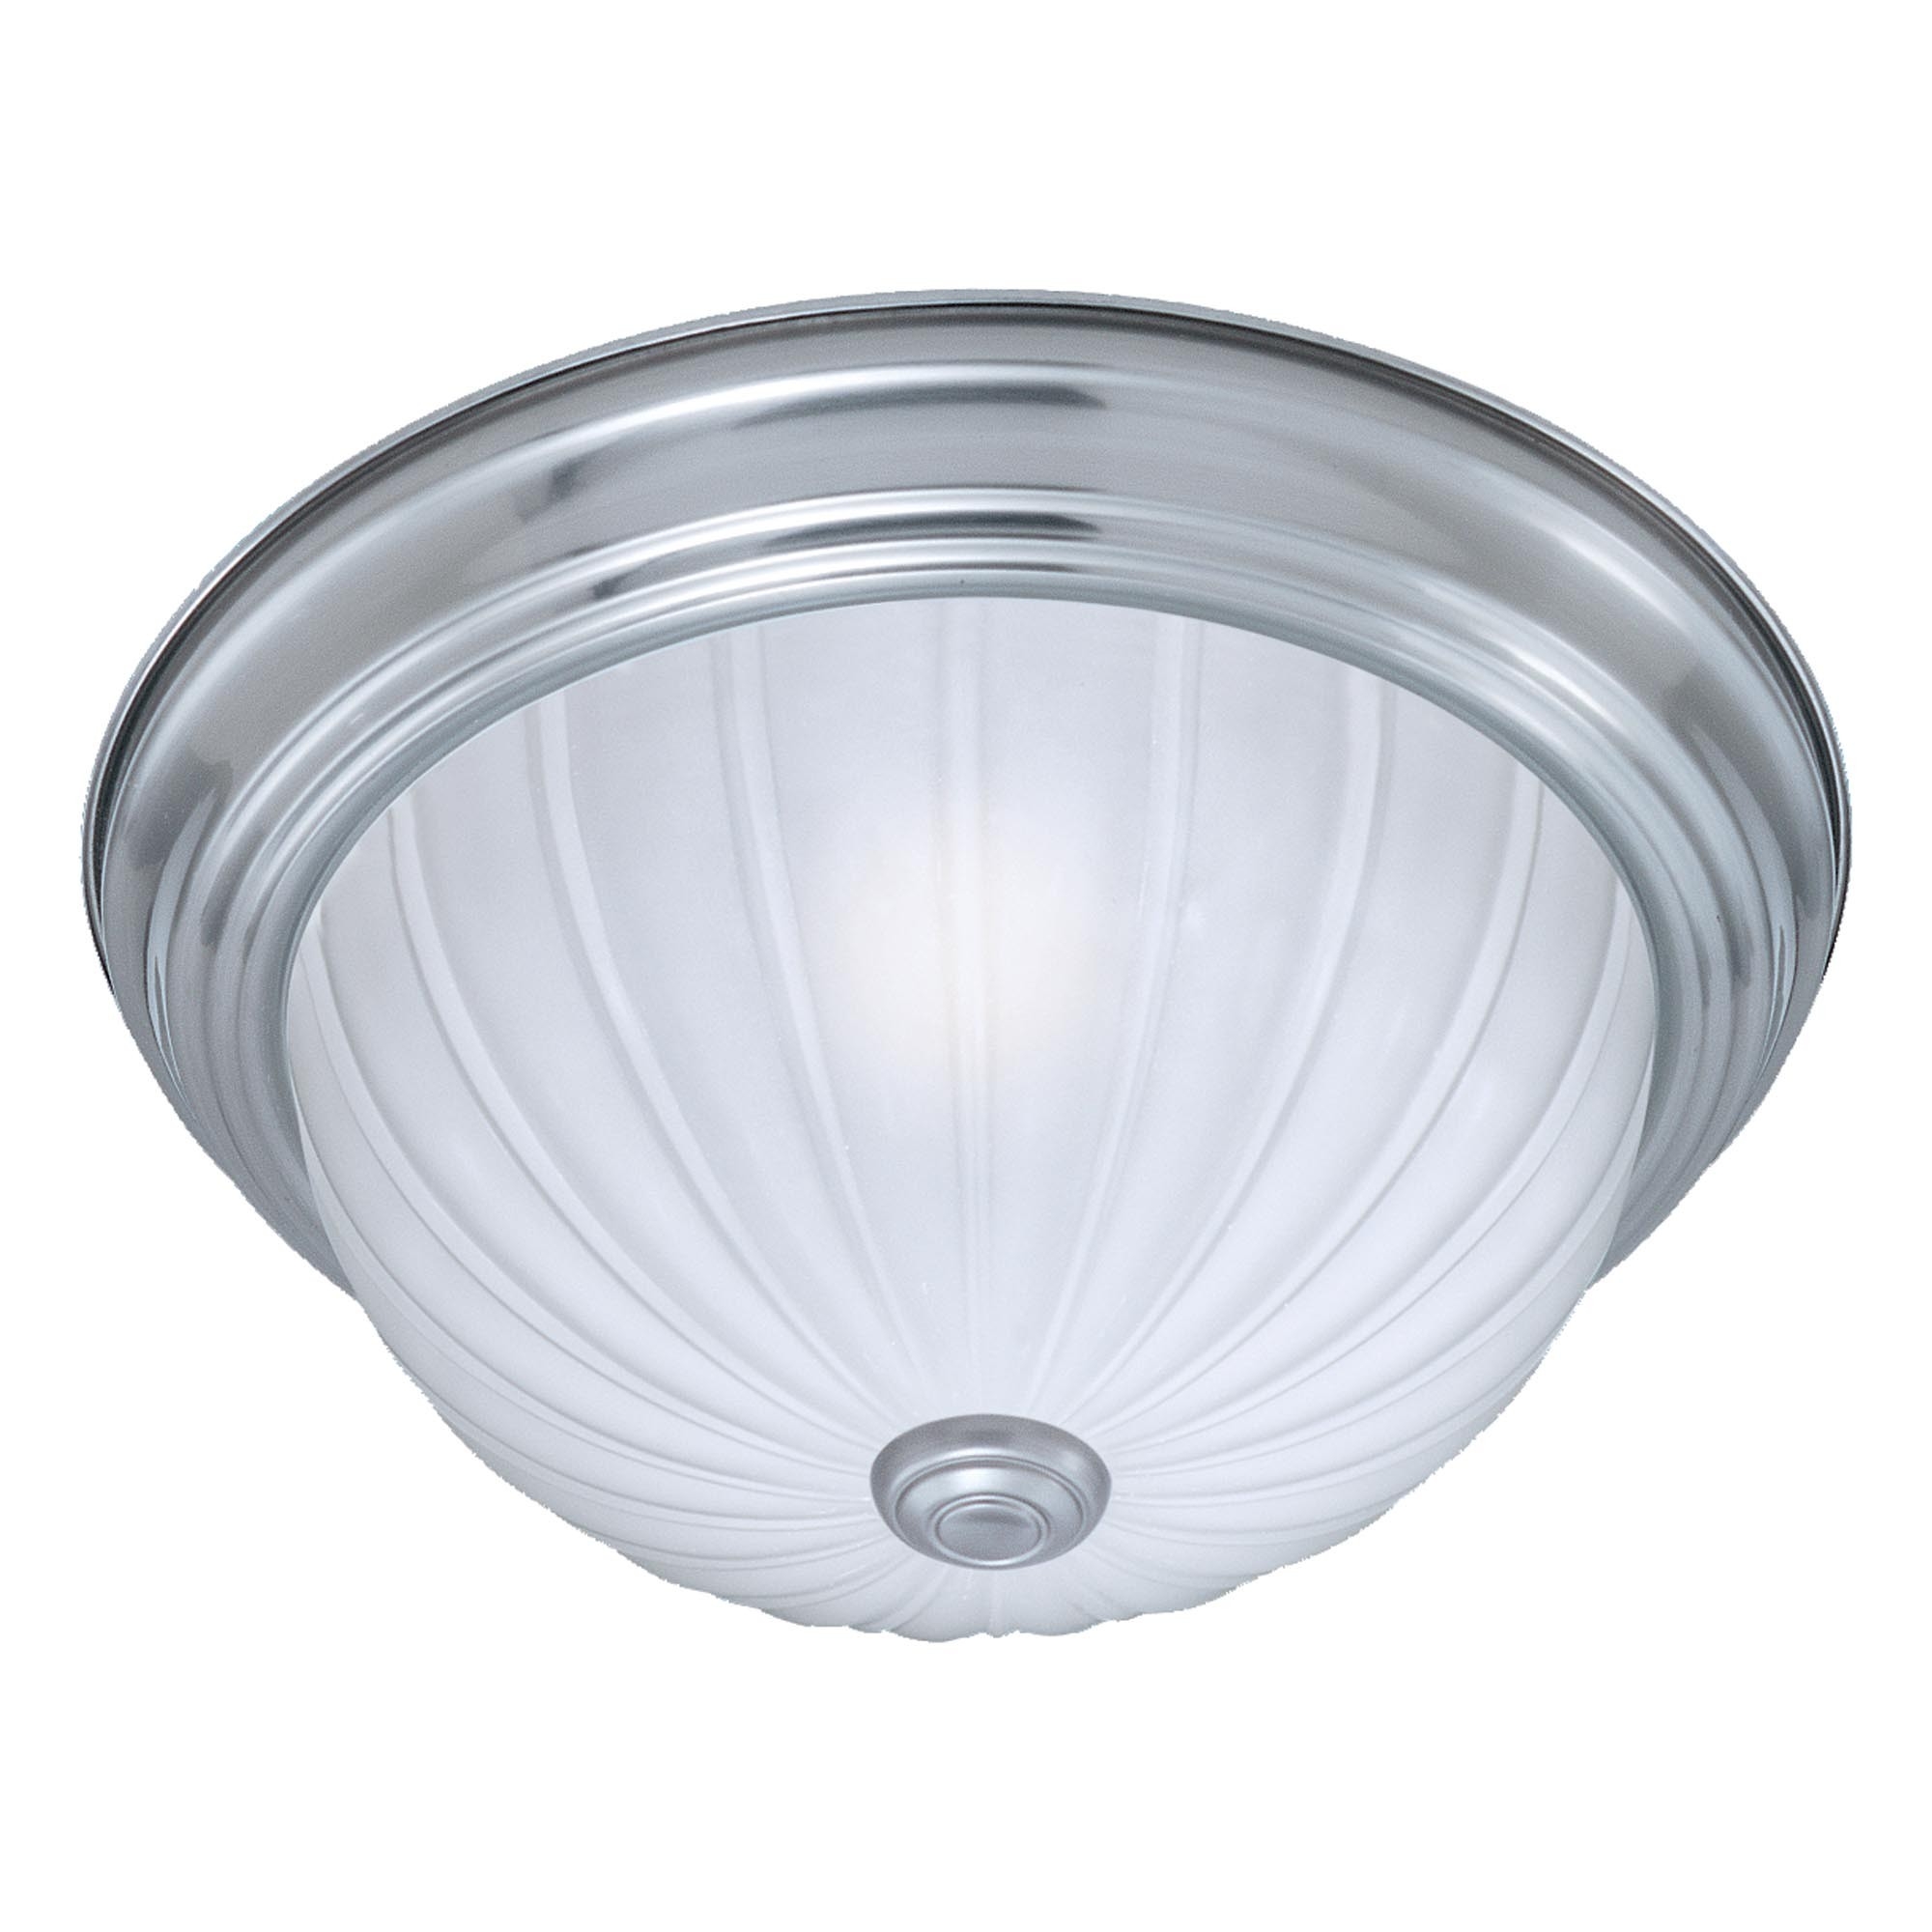 Types Of Ceiling Light Fixture2000 X 2000